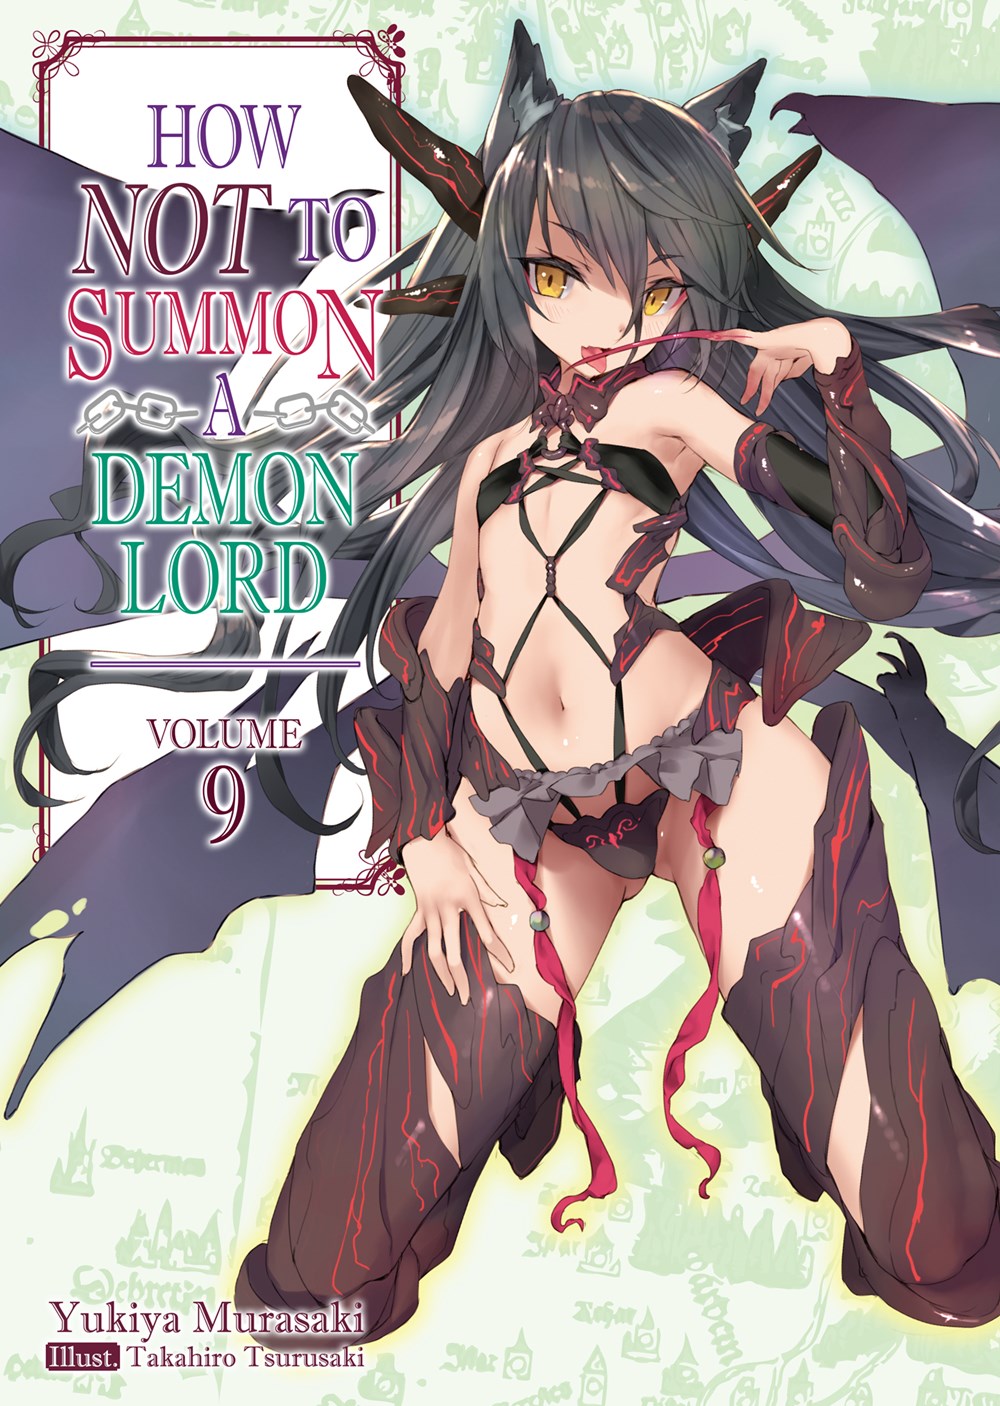 The Demon Lord Act - How Not to Summon a Demon Lord (Series 1, Episode 1) -  Apple TV (SI)